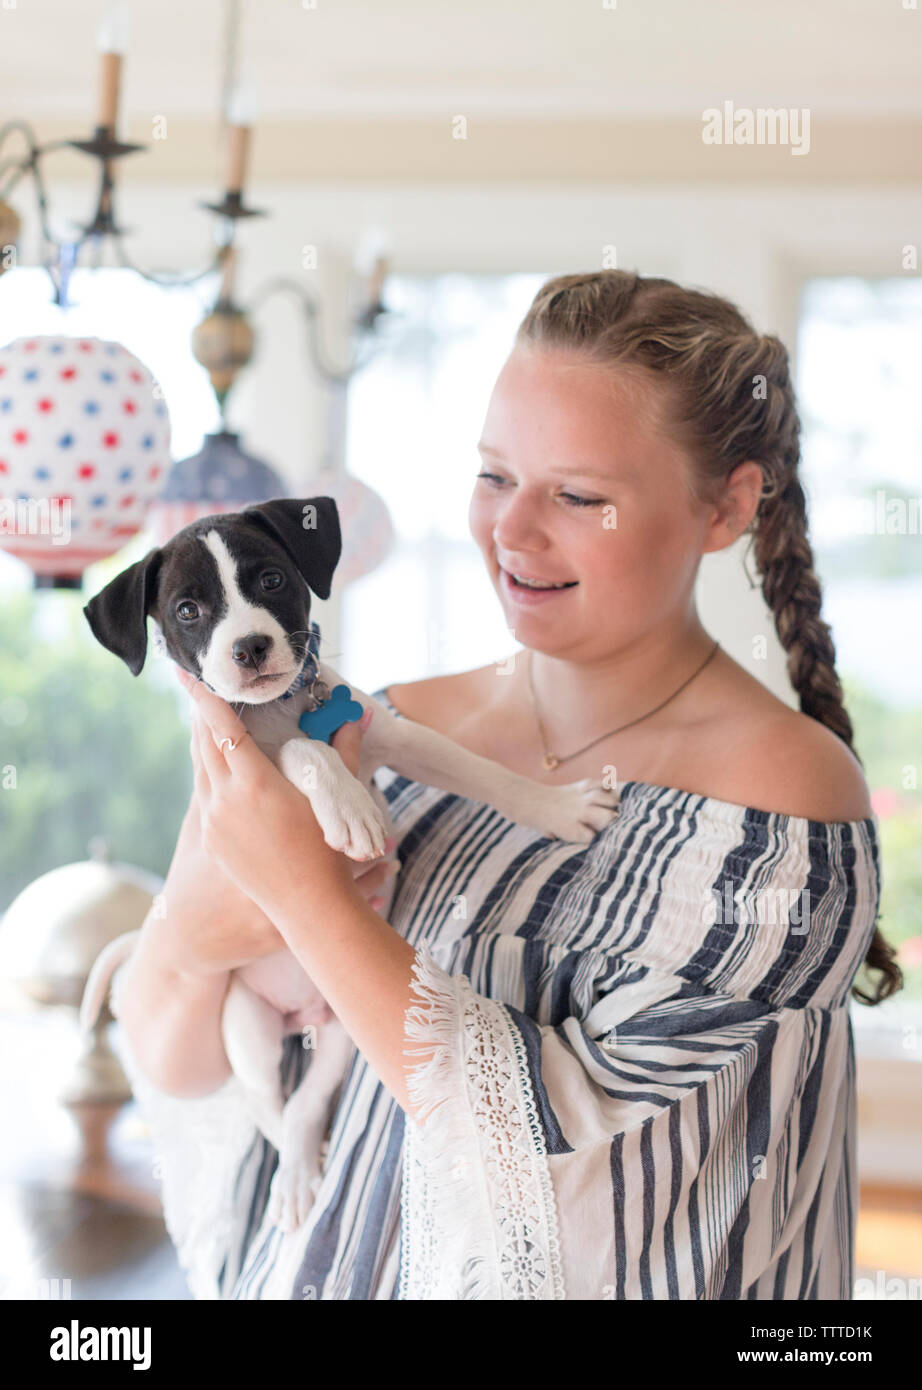 young girl holding puppy Stock Photo